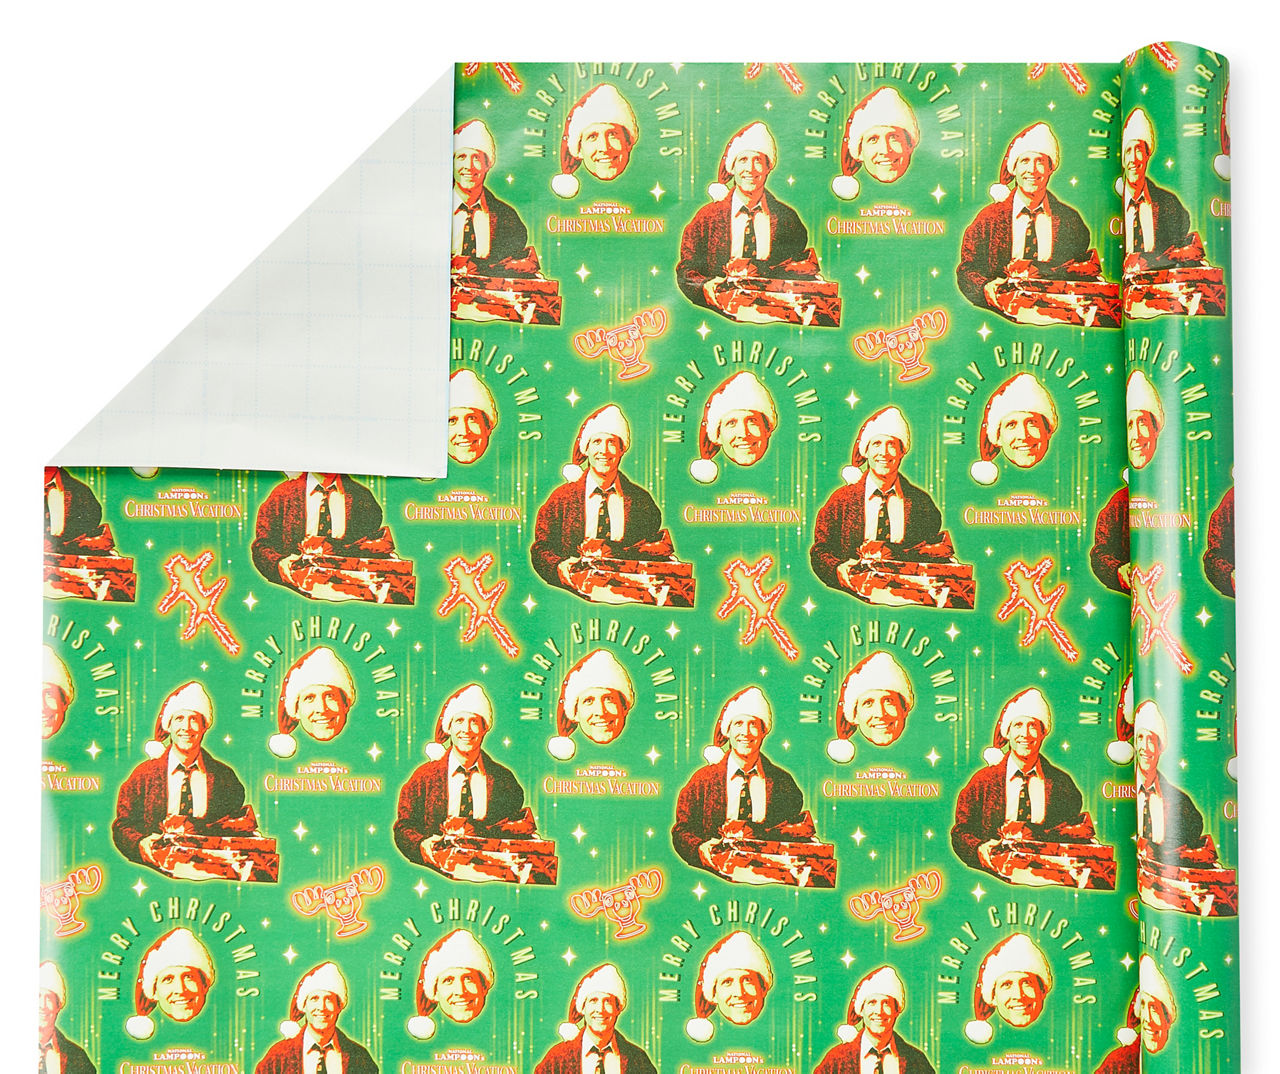 THE SANTA CLAUSE Large Wrapping Paper Original Movie Prop (0152-1873)